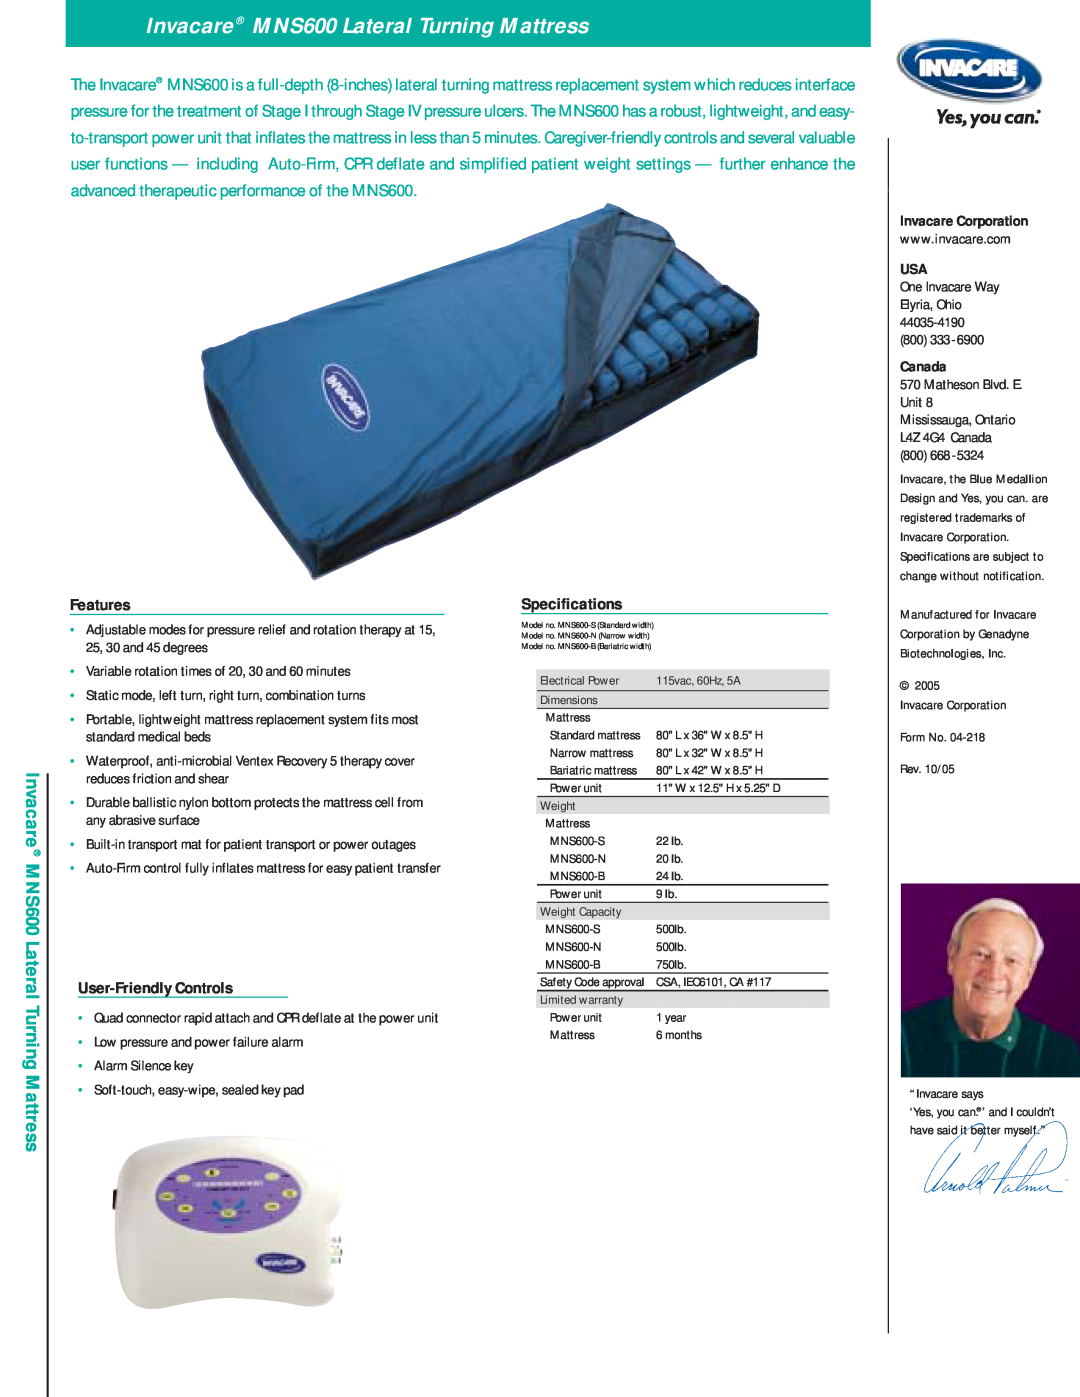 Invacare manual Invacare MNS600 Lateral Turning Mattress, Features, User-Friendly Controls, Specifications, Canada 